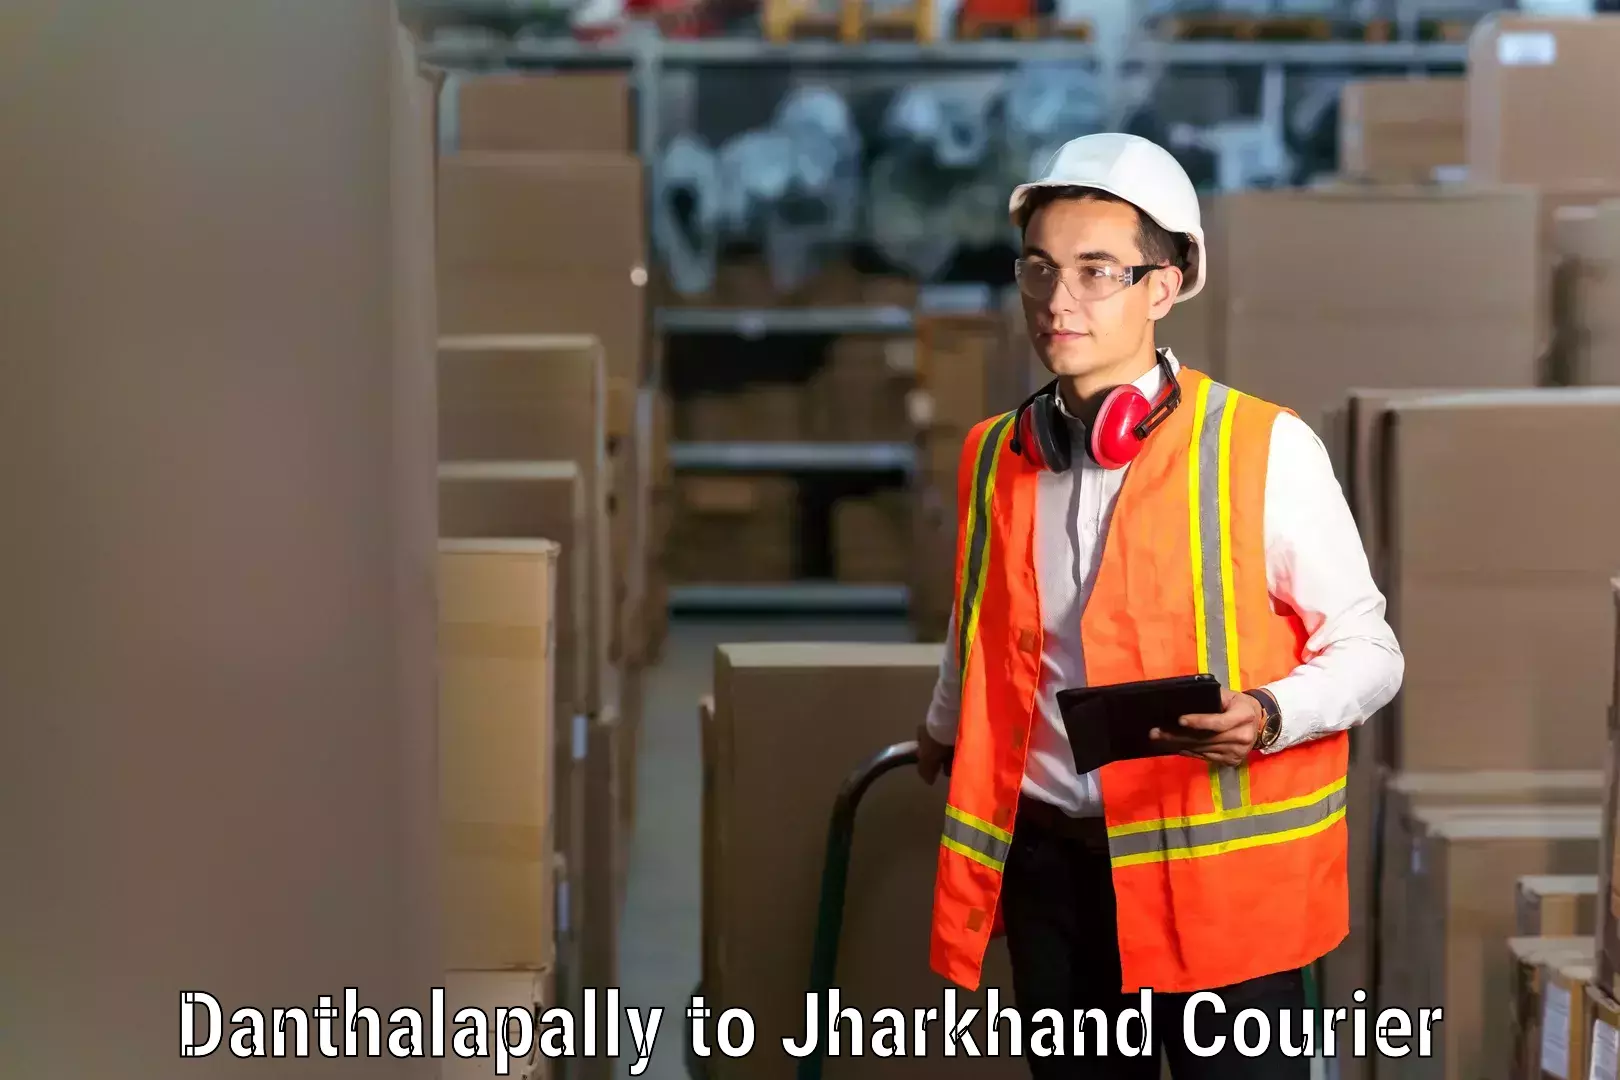 Skilled furniture movers in Danthalapally to Jamshedpur